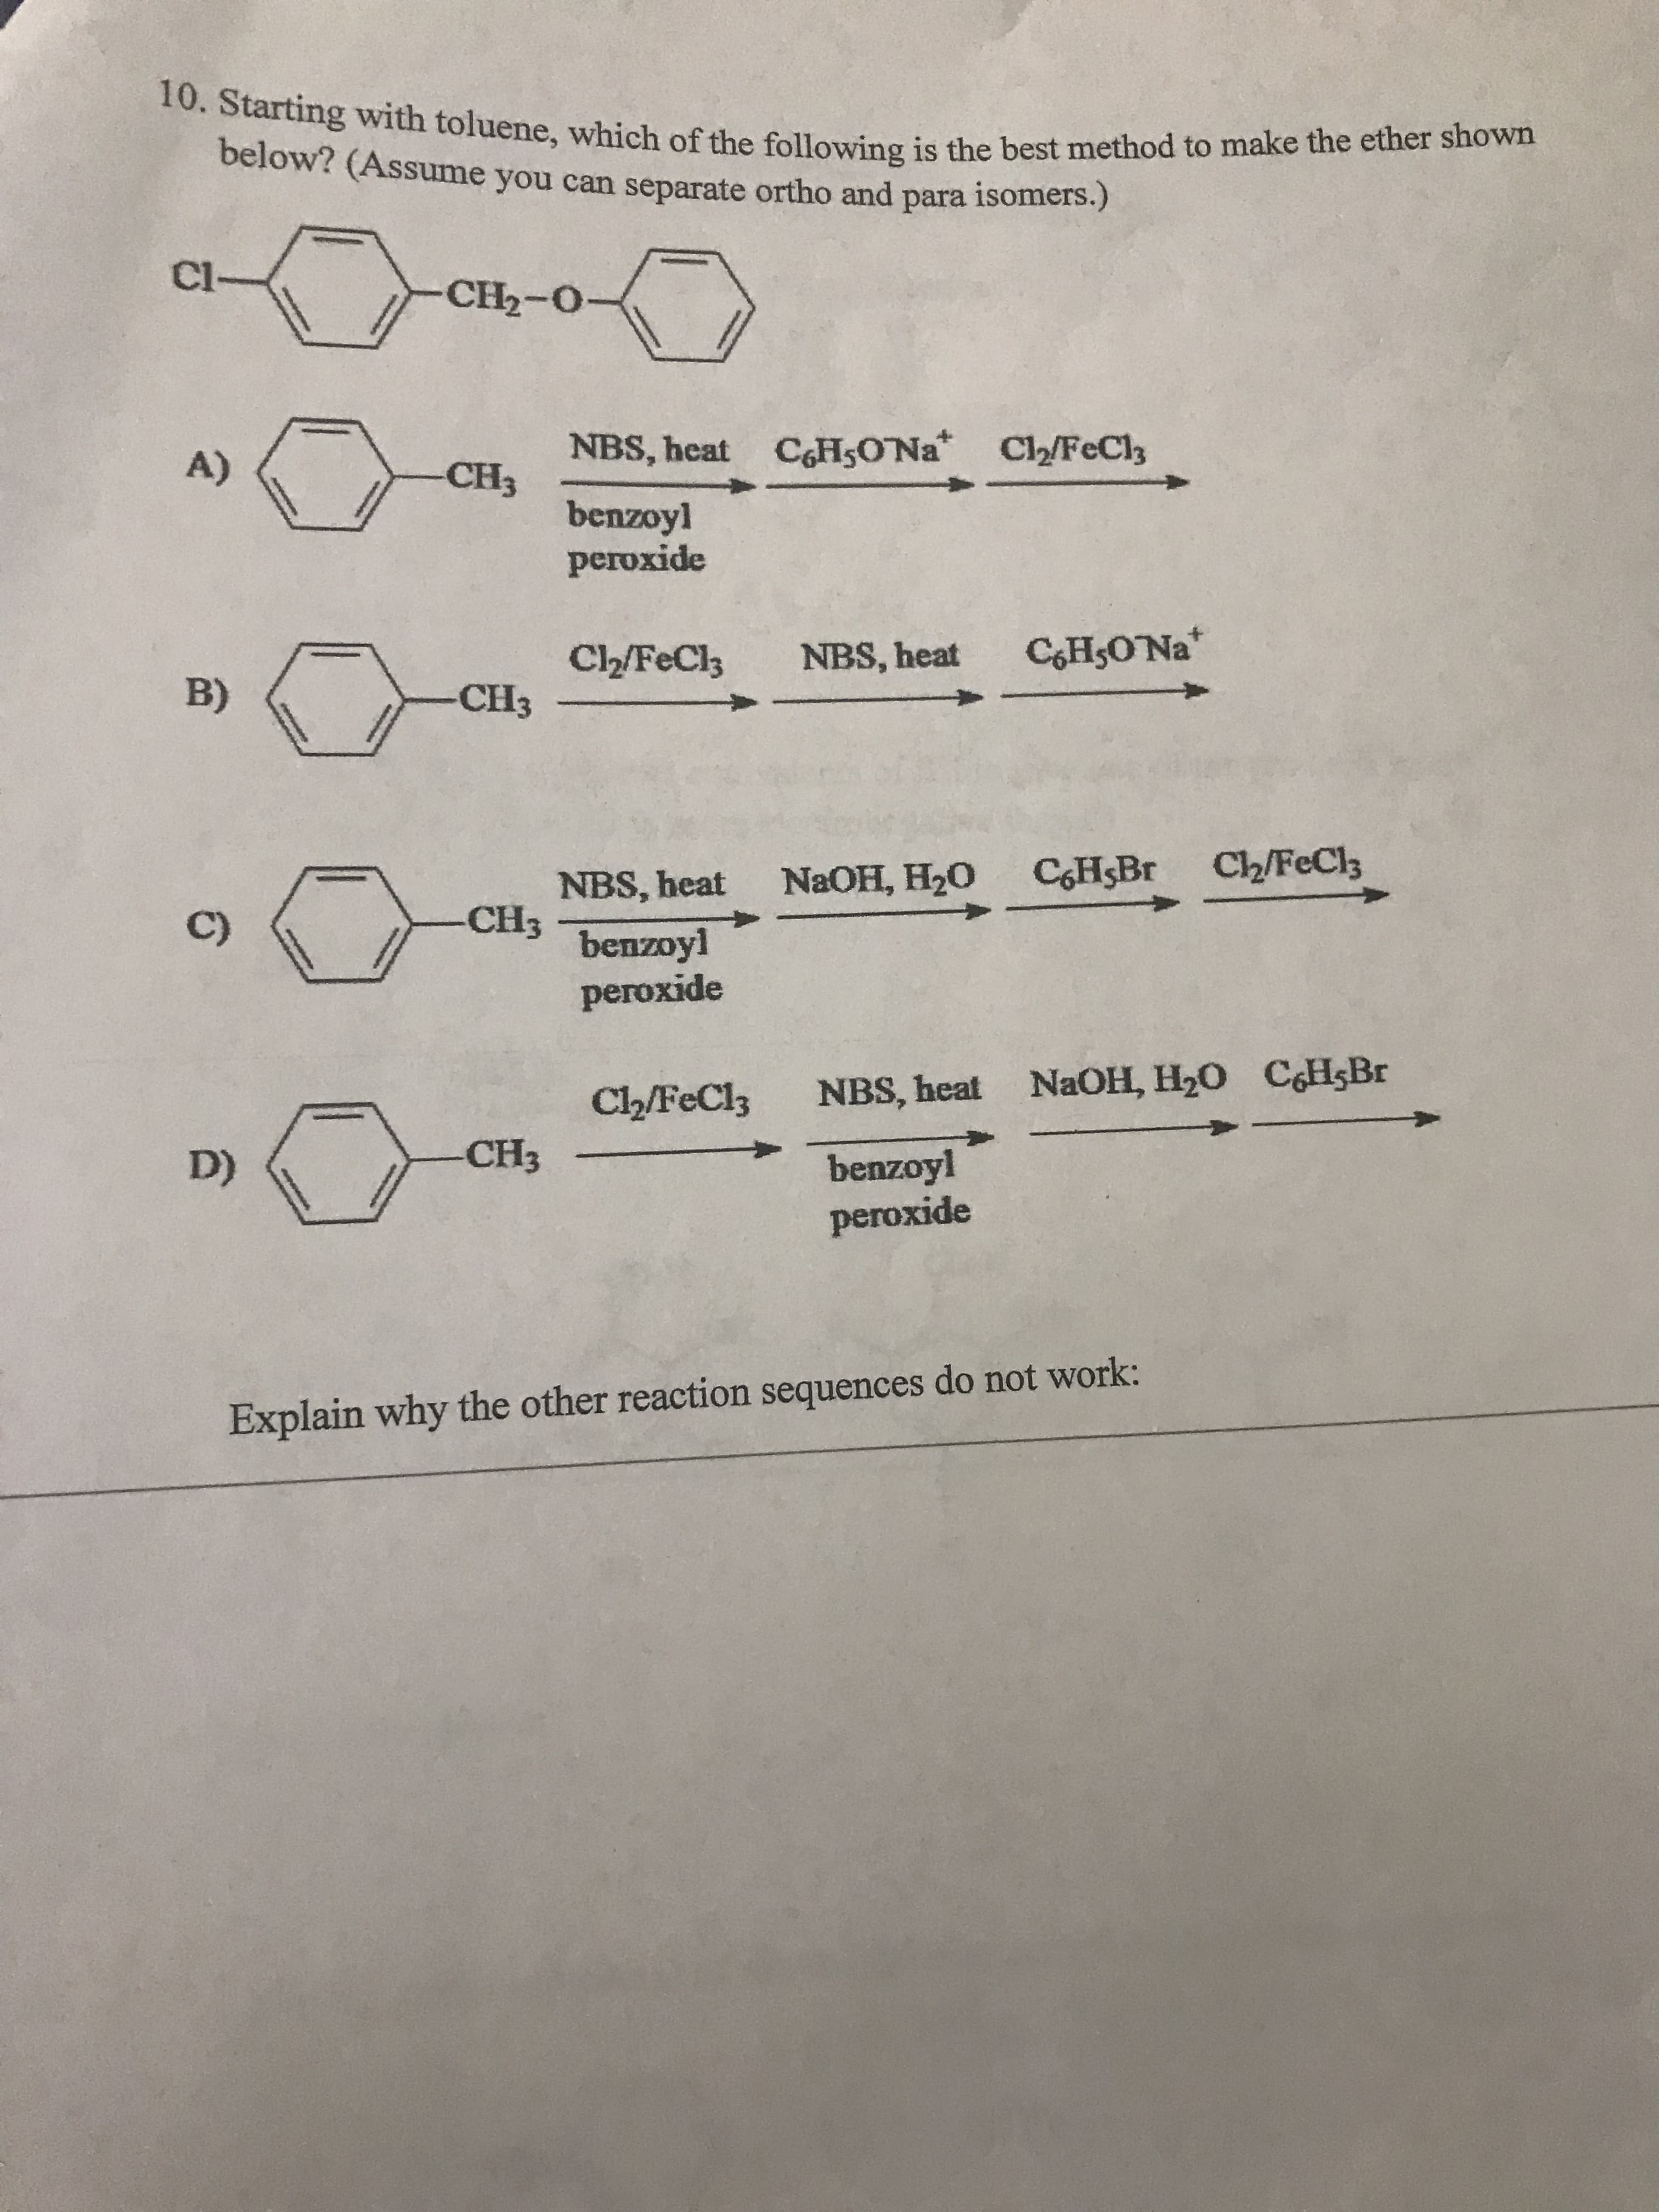 10. Starting with toluene, which of the following is the best method to make the ether shown
below? (Assume you can separate ortho and para isomers.)
Cl-
CH2-O-
NBS, heat C6H5ONa Cl2/FeCl3
A)
CH3
benzoyl
peroxide
CoHsONa
C2/FeCl3
NBS, heat
B)
-СHз
NBS, heat NaOH, H20 CHBr Ch/FeCl
CH3 benzoyl
C)
peroxide
NBS, heat NaOH, H20 CHsBr
Cl2/FeCl3
-CH3
D)
benzoyl
peroxide
Explain why the other reaction sequences do not work:
ww
www
ww
